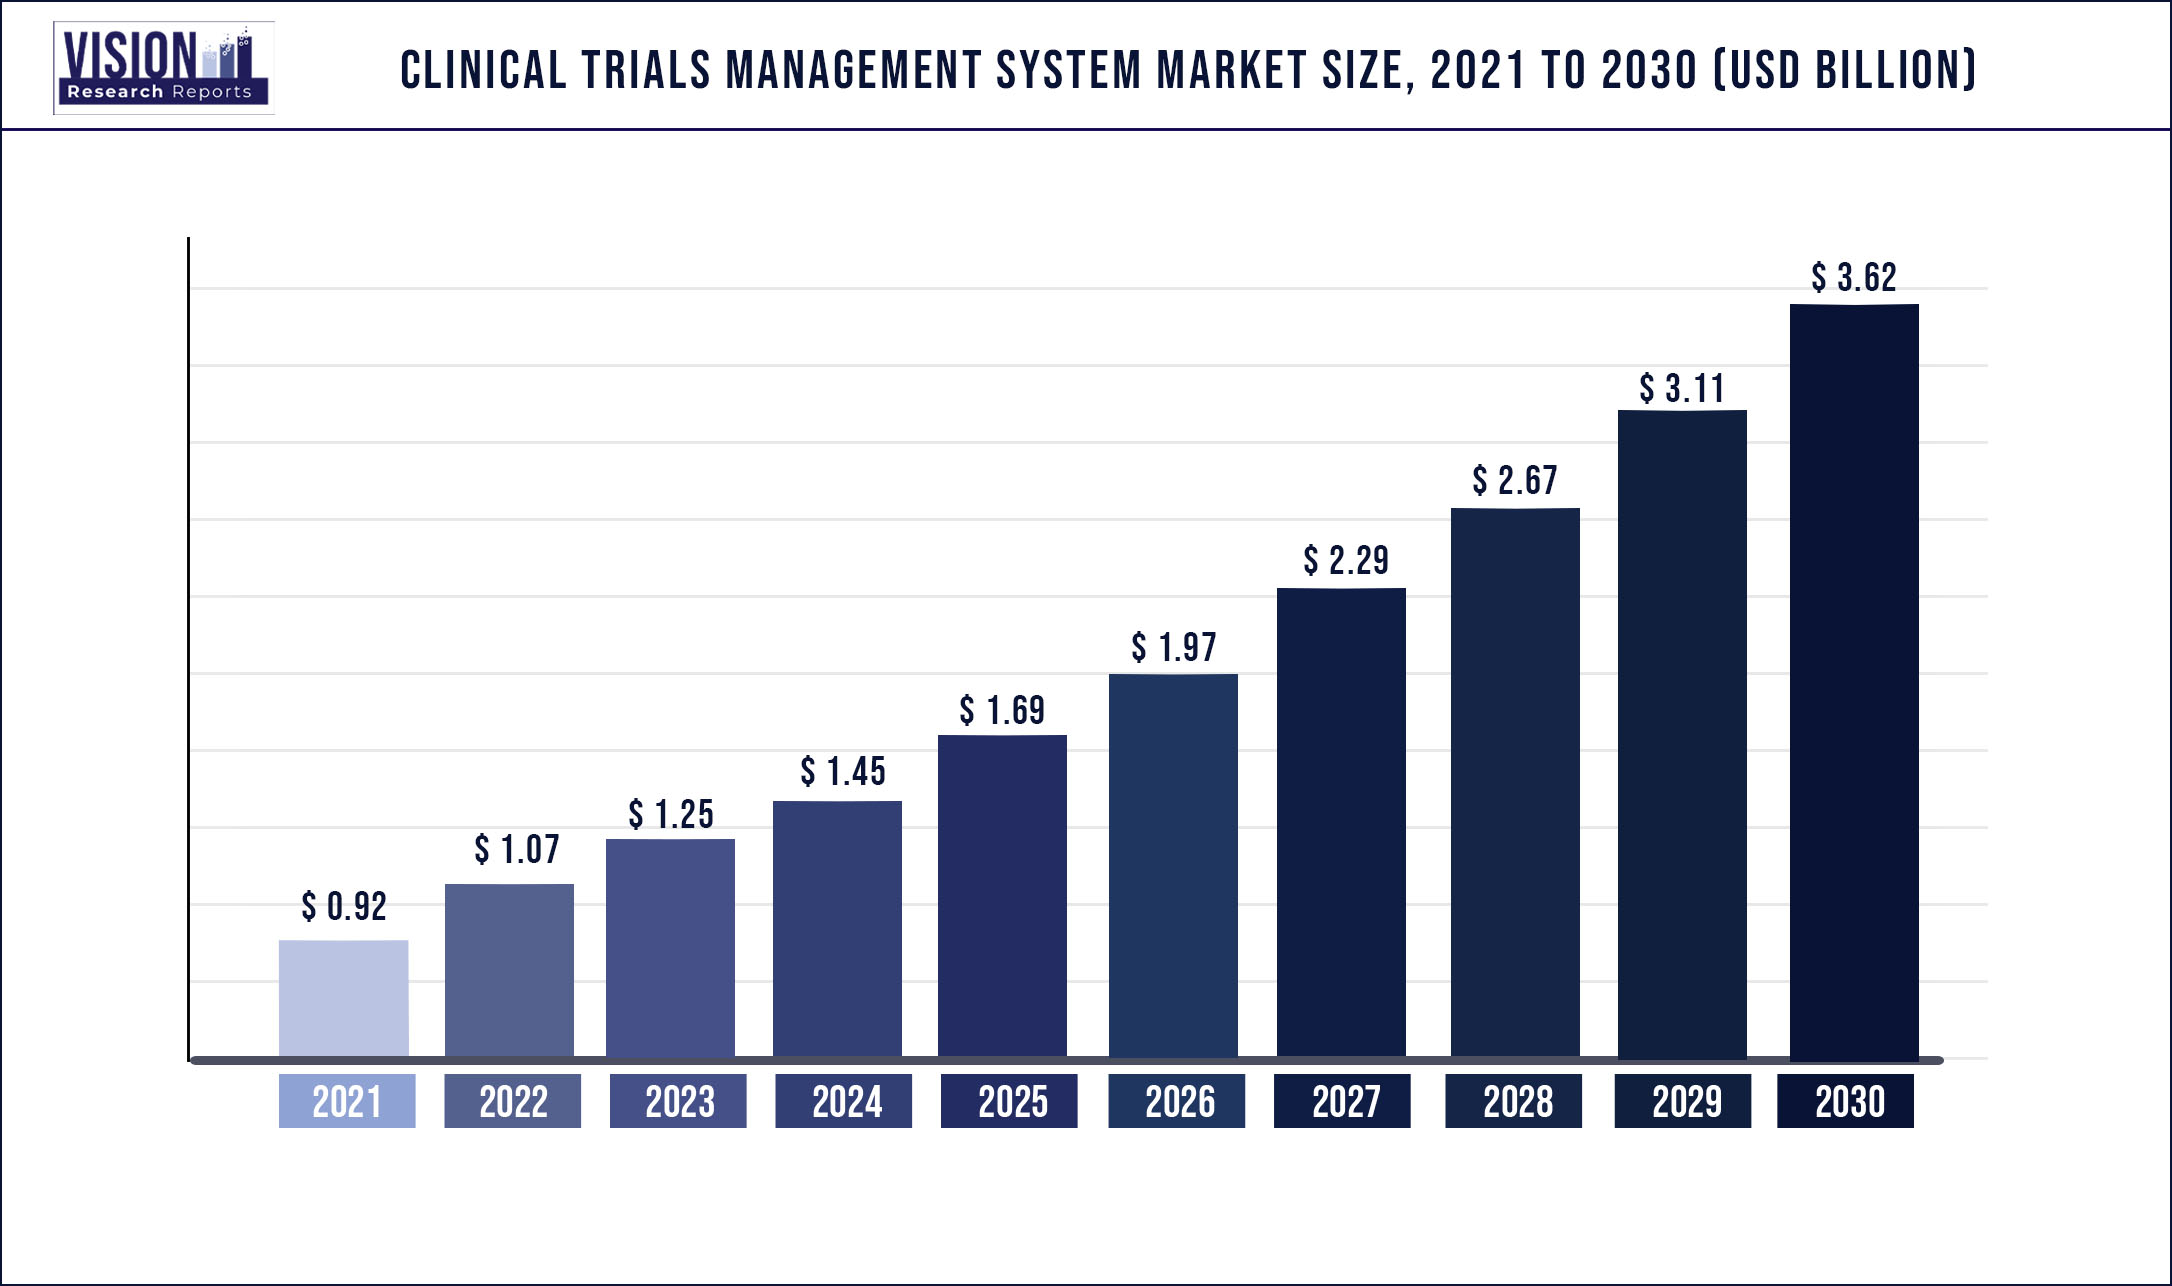 Clinical Trials Management System Market Size 2021 to 2030